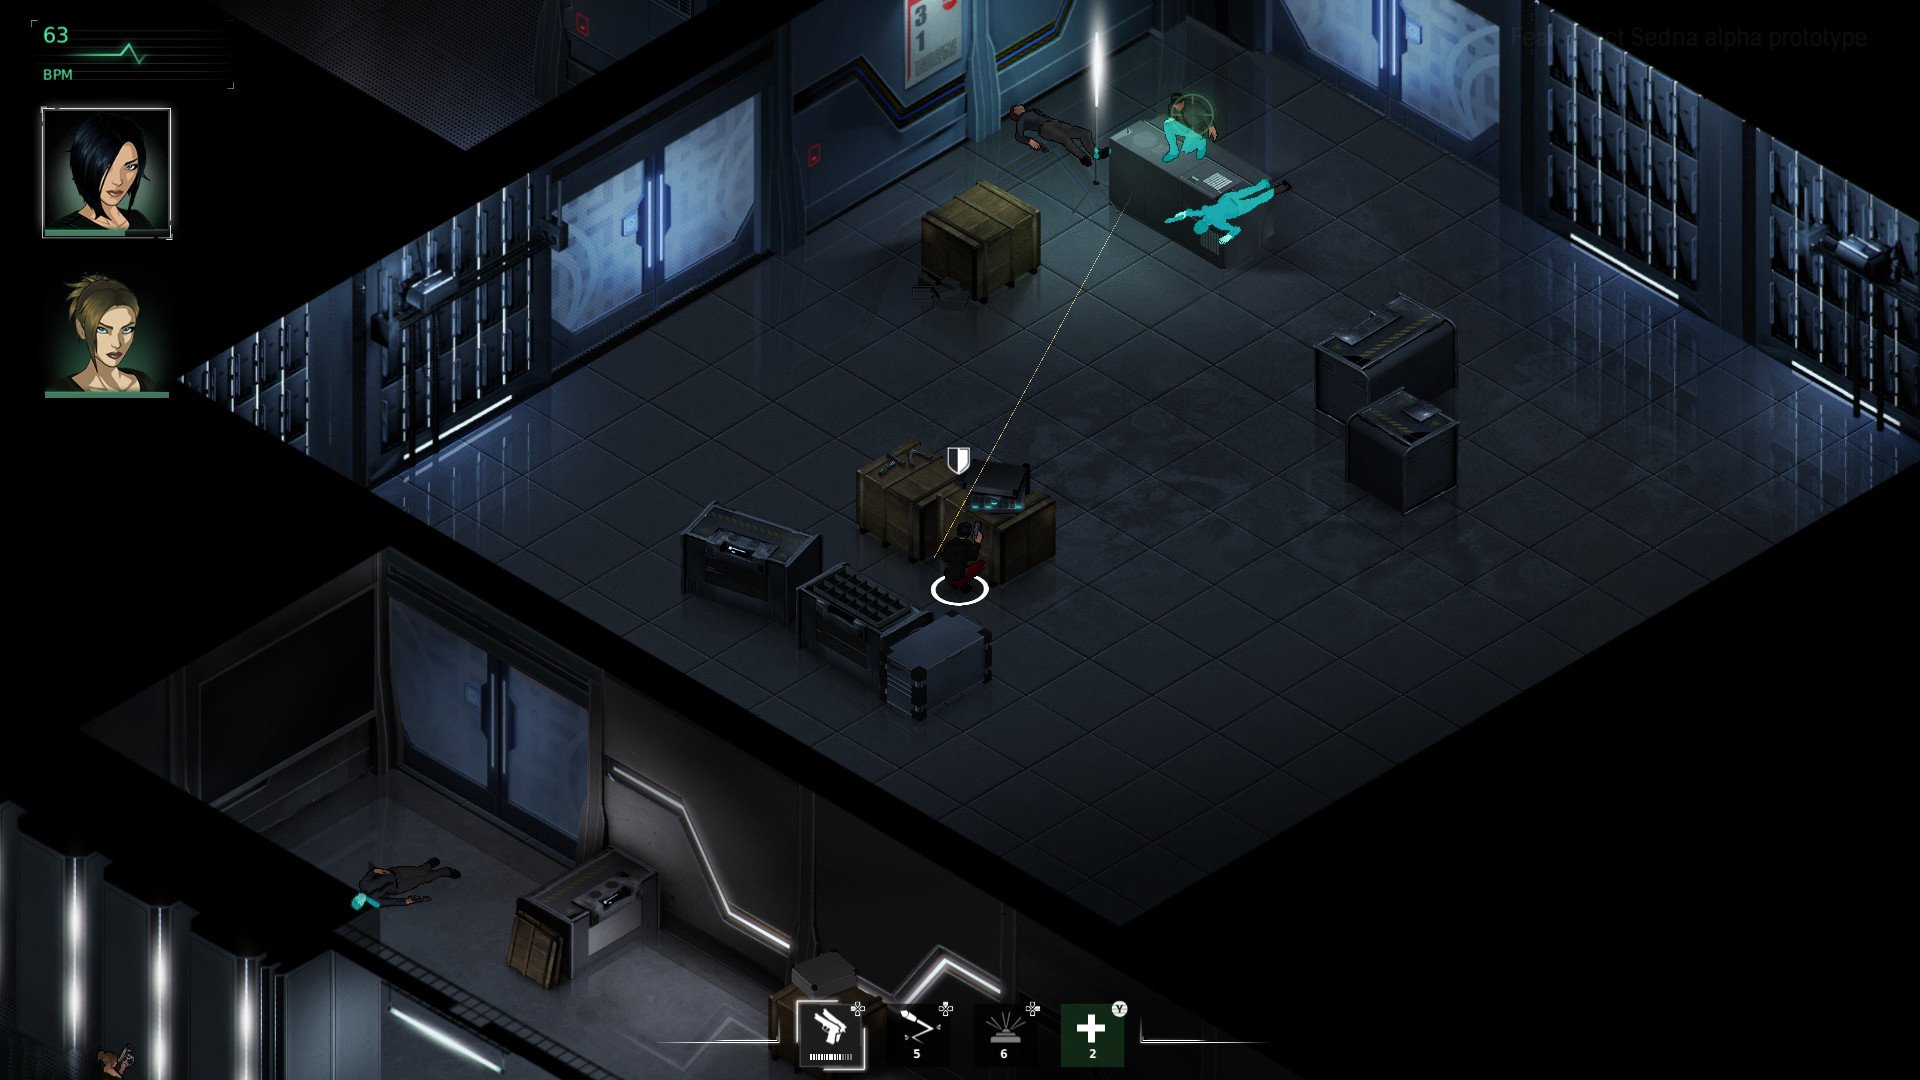 Fear Effect Sedna Collector's Edition 4